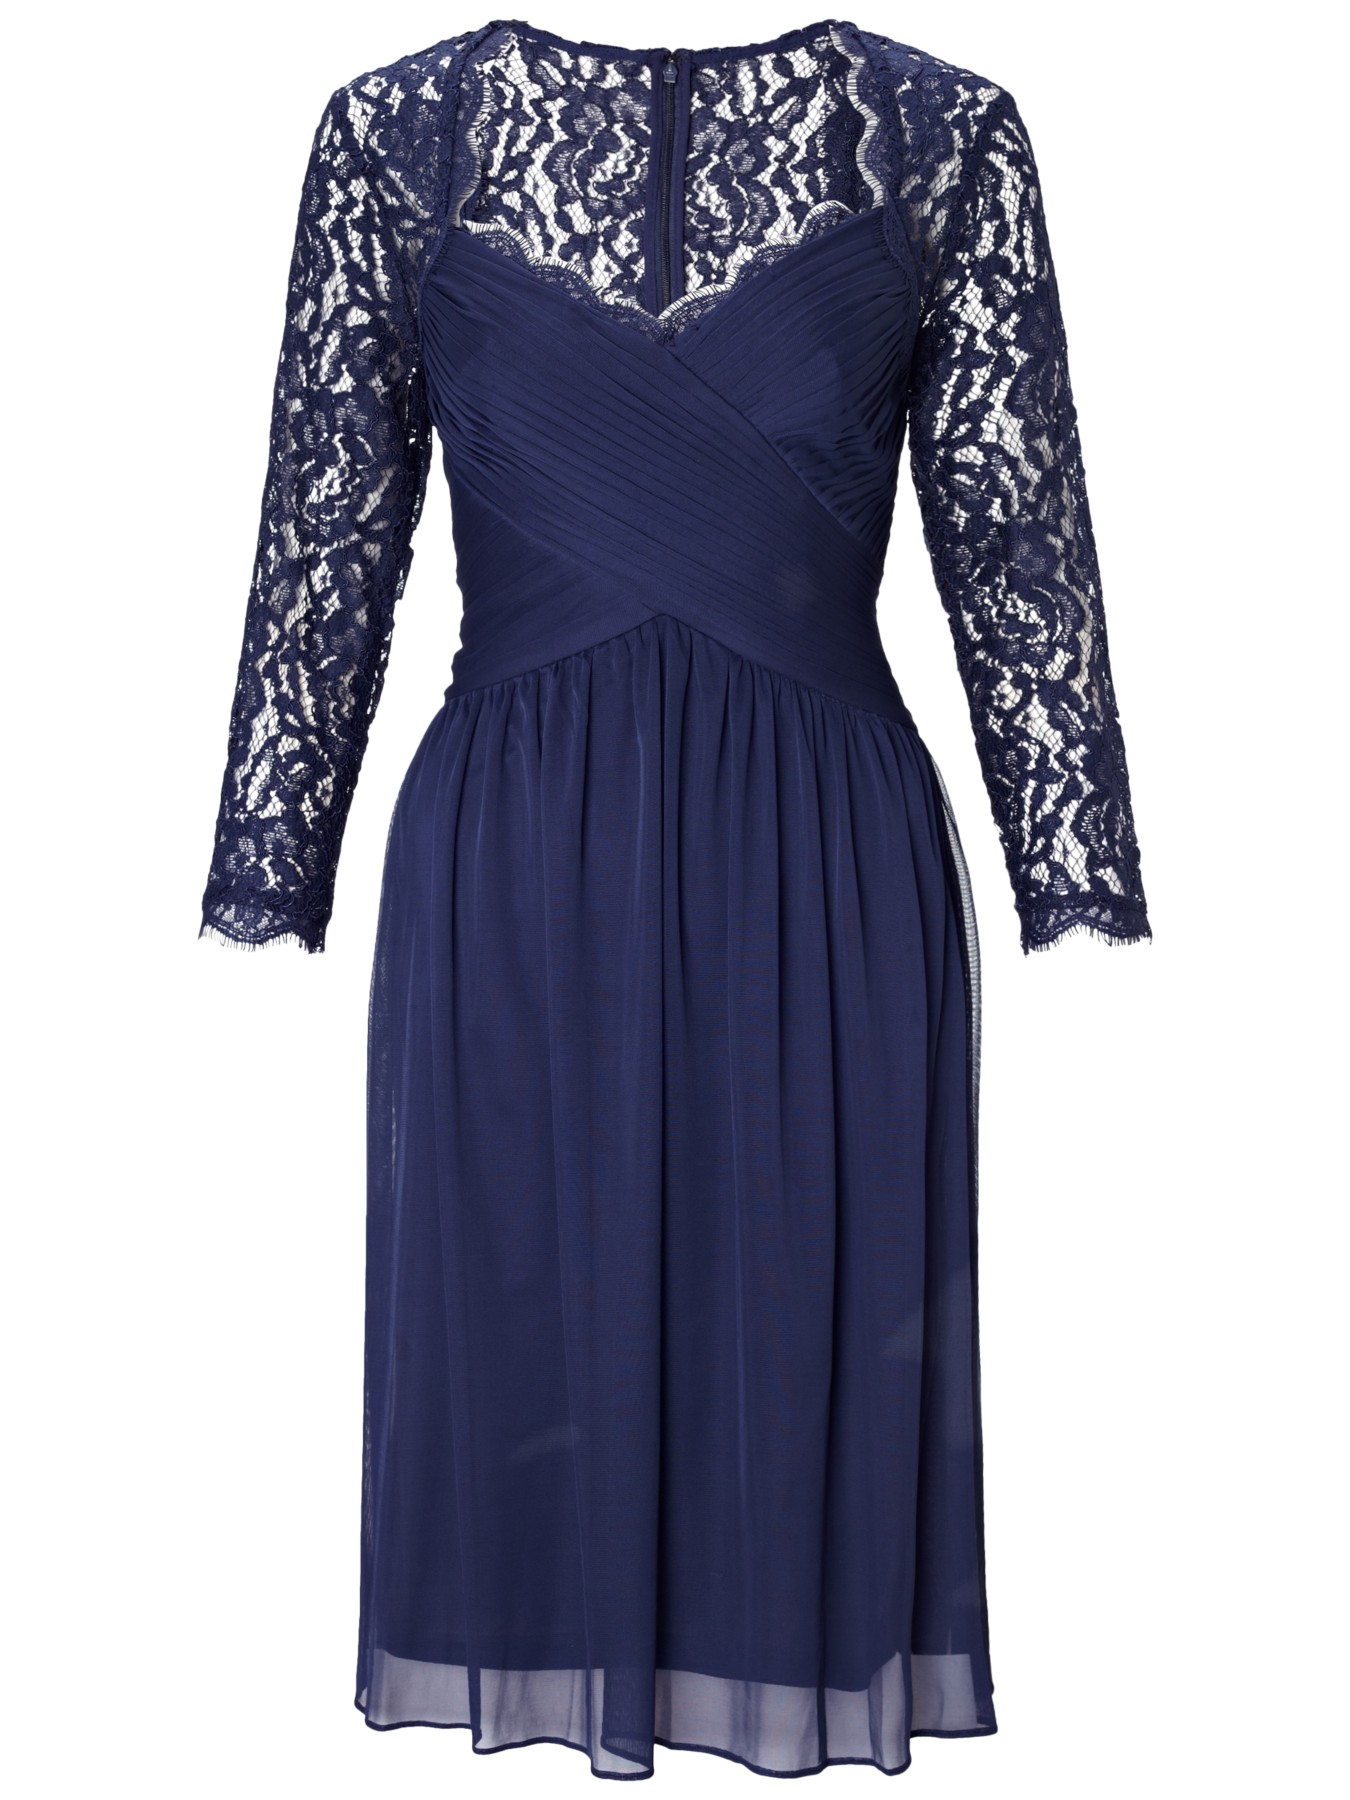 Adrianna Papell Draped Lace Dress in Blue (Navy) | Lyst